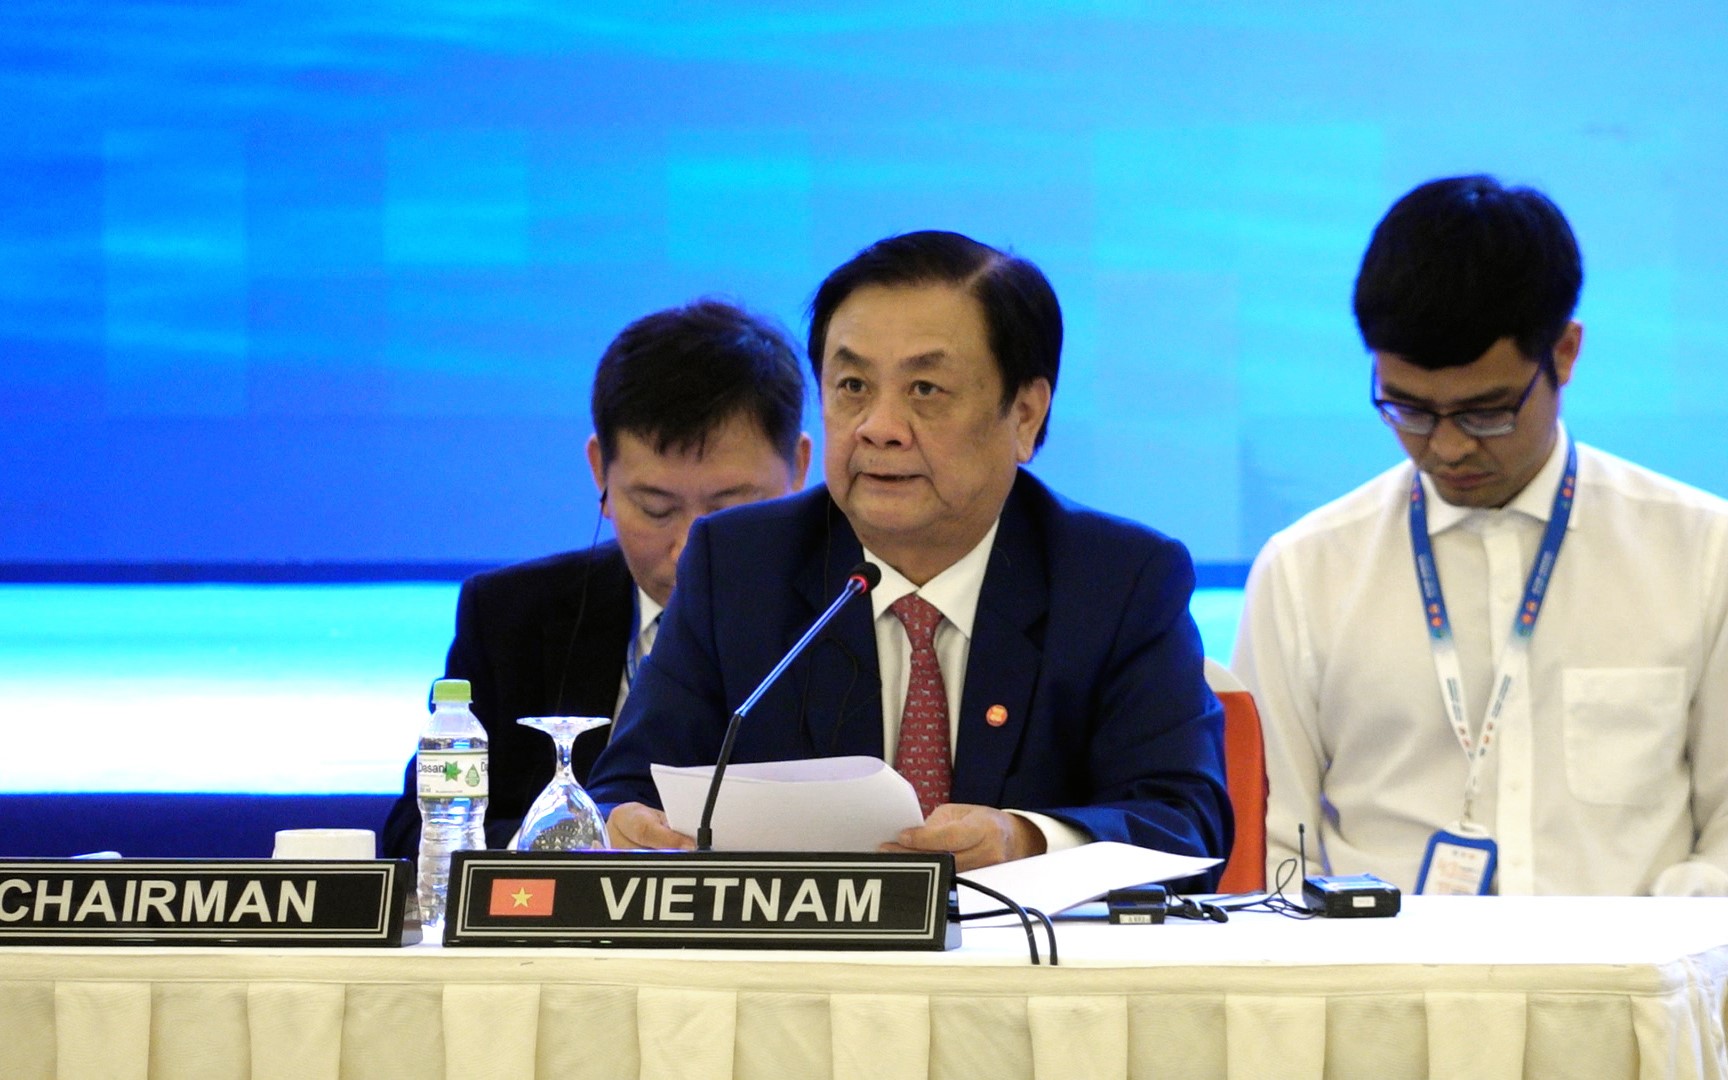 Minister Le Minh Hoan said that managing natural disasters effectively is a way for ASEAN to develop sustainably. Photo: Quang Dung.